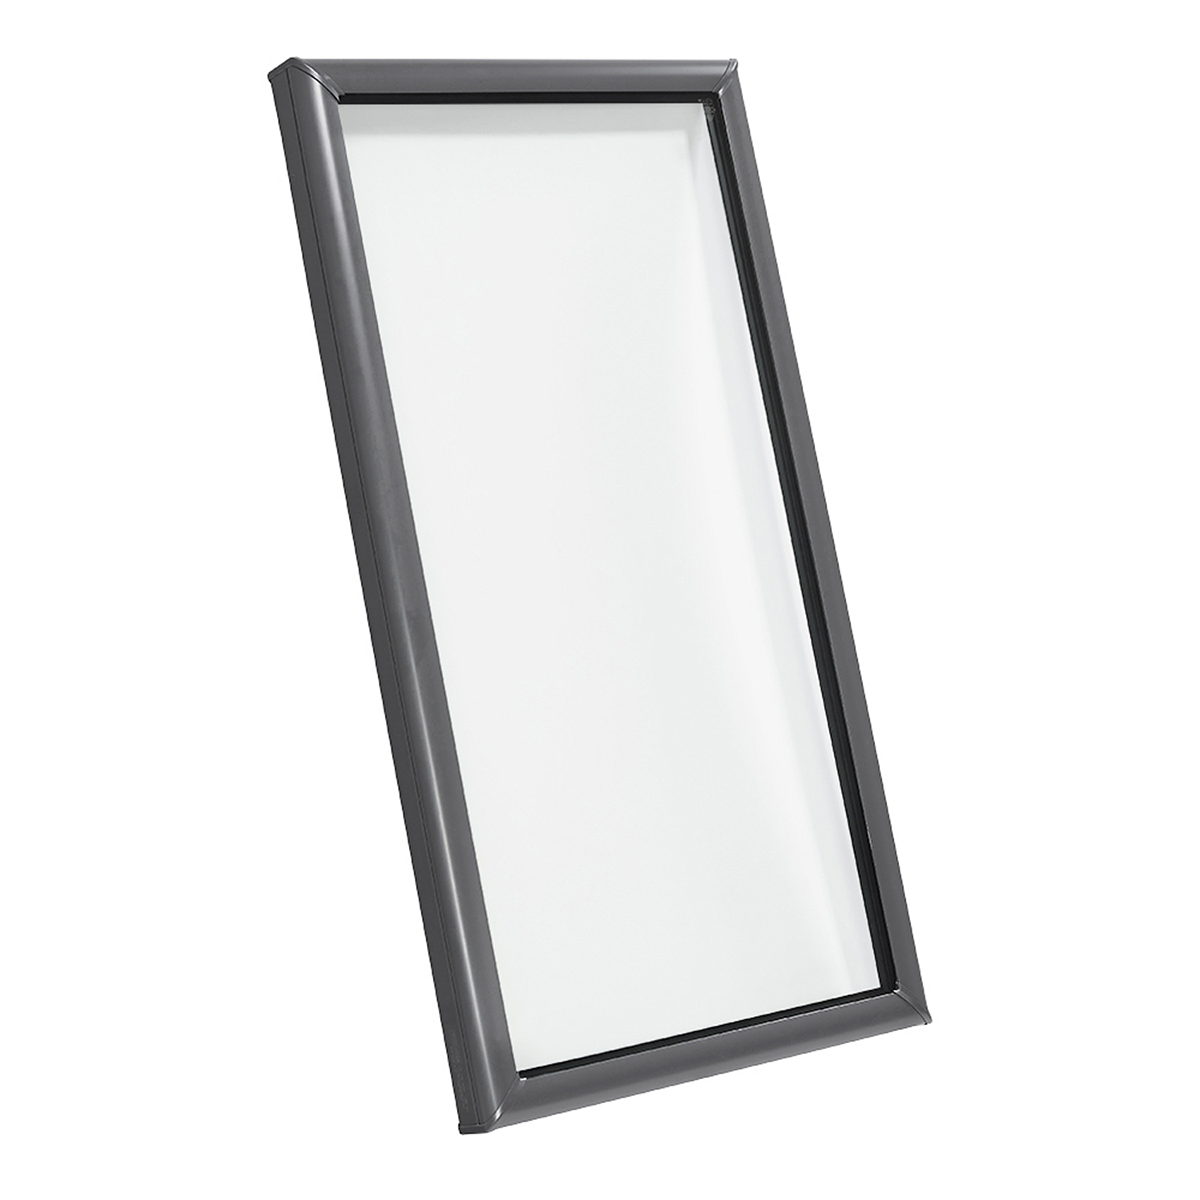 Fixed Curb-Mount Skylight with Laminated Low-E3 Glass - 46-1/2 in. x 46-1/2 in. - FCM 4646